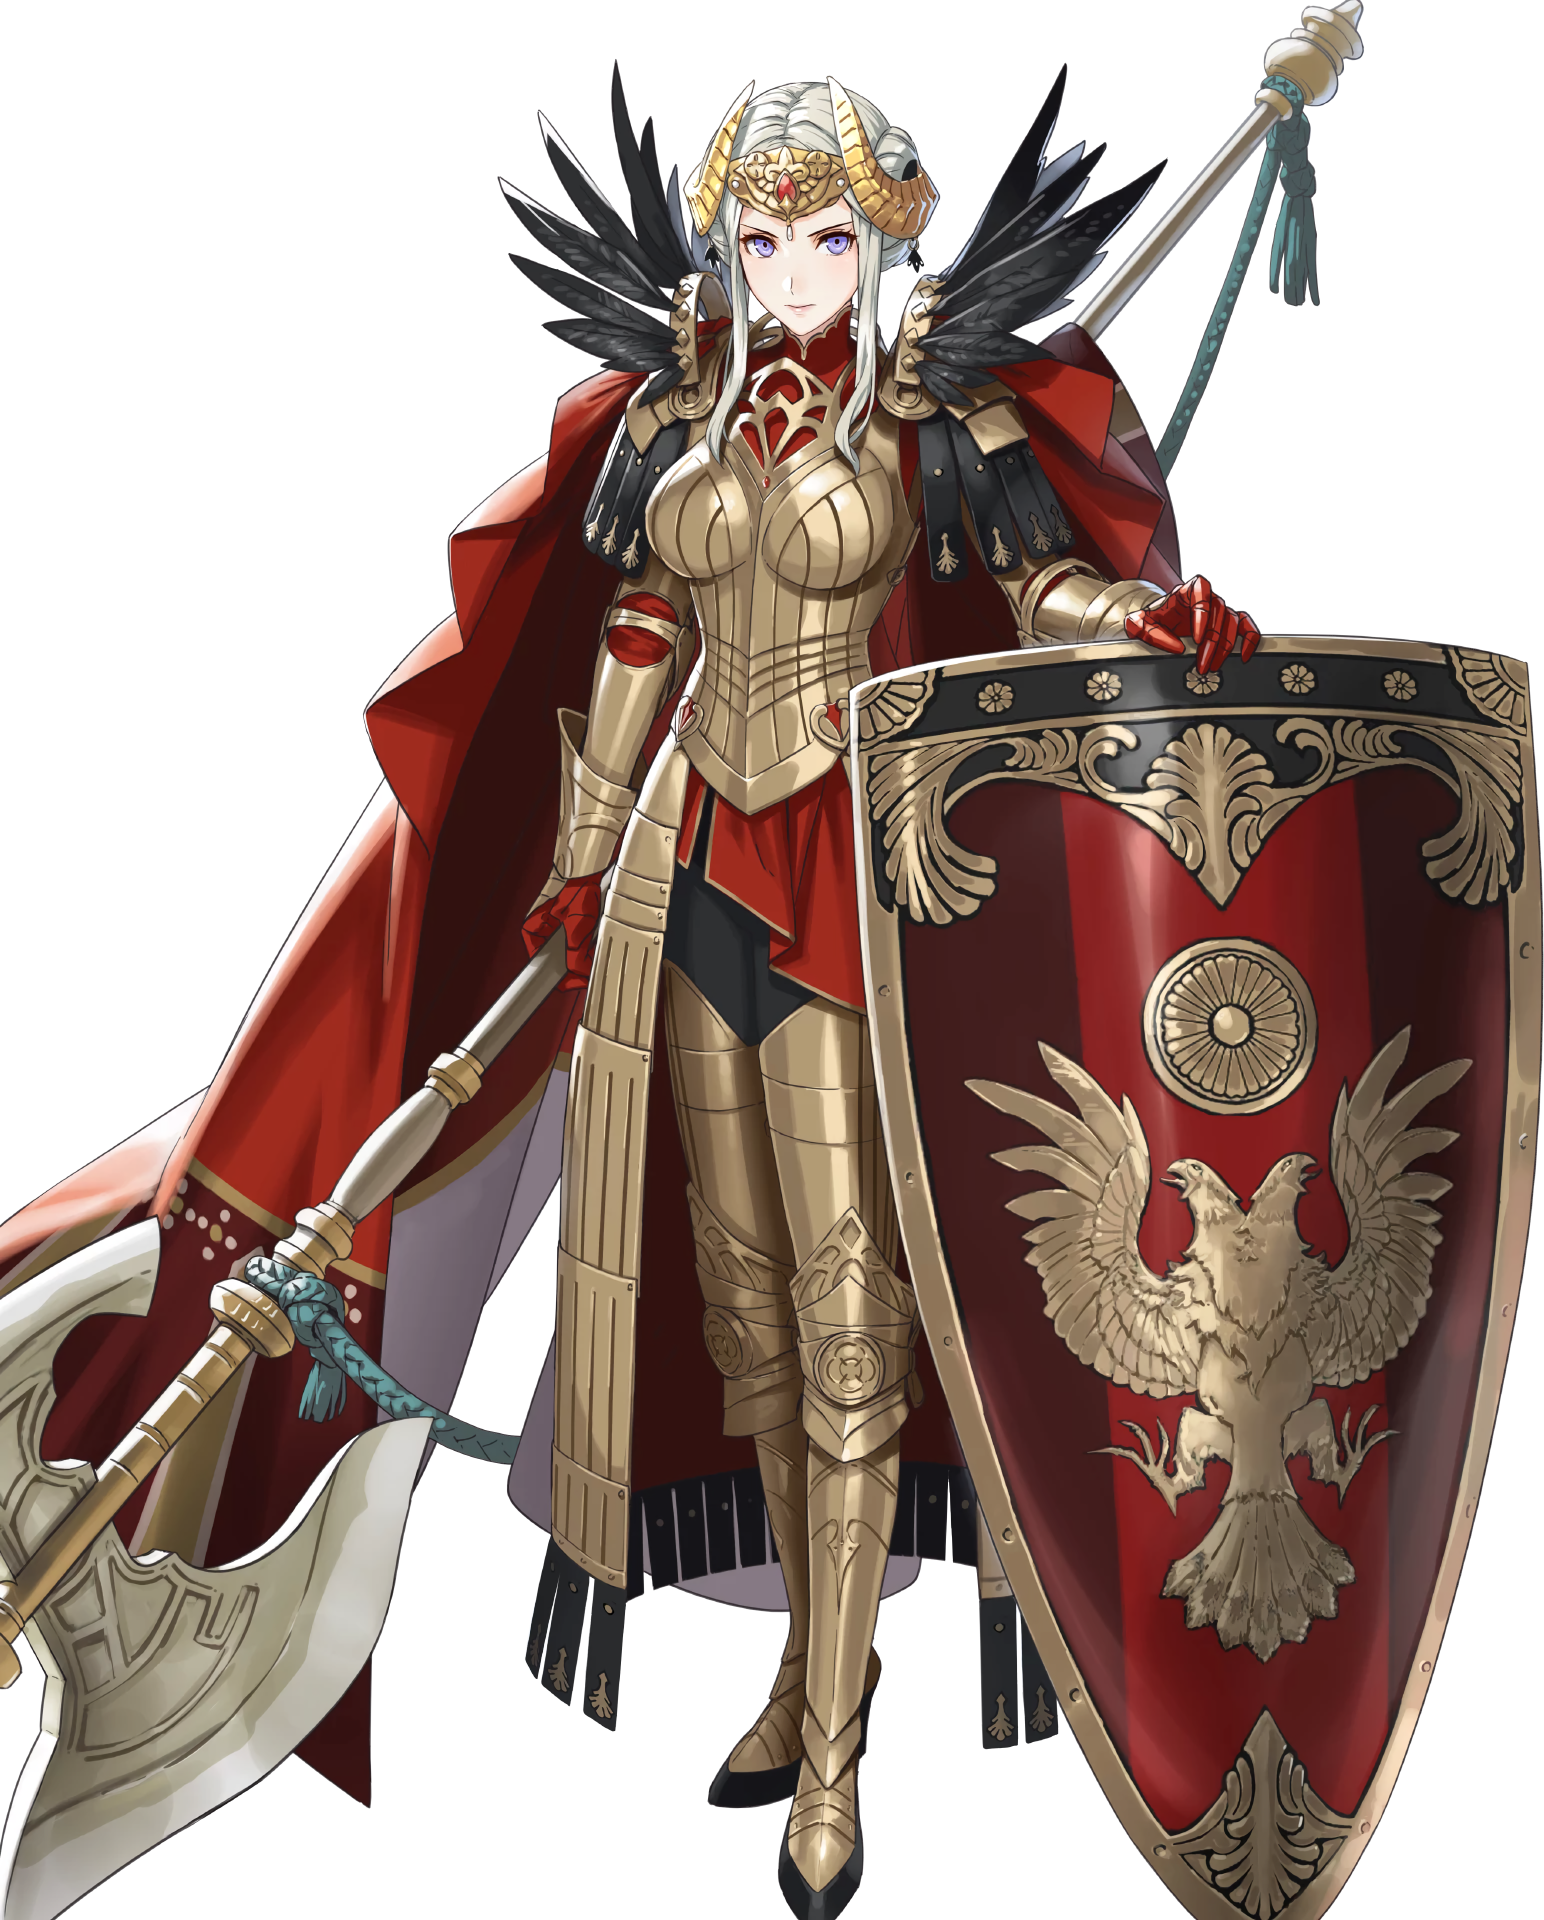 Edelgard's 'Emperor' portrait from Heroes. An intense woman with white hair and a horned crown dressed in elaborate gold armor, with a large shield and battleaxe.